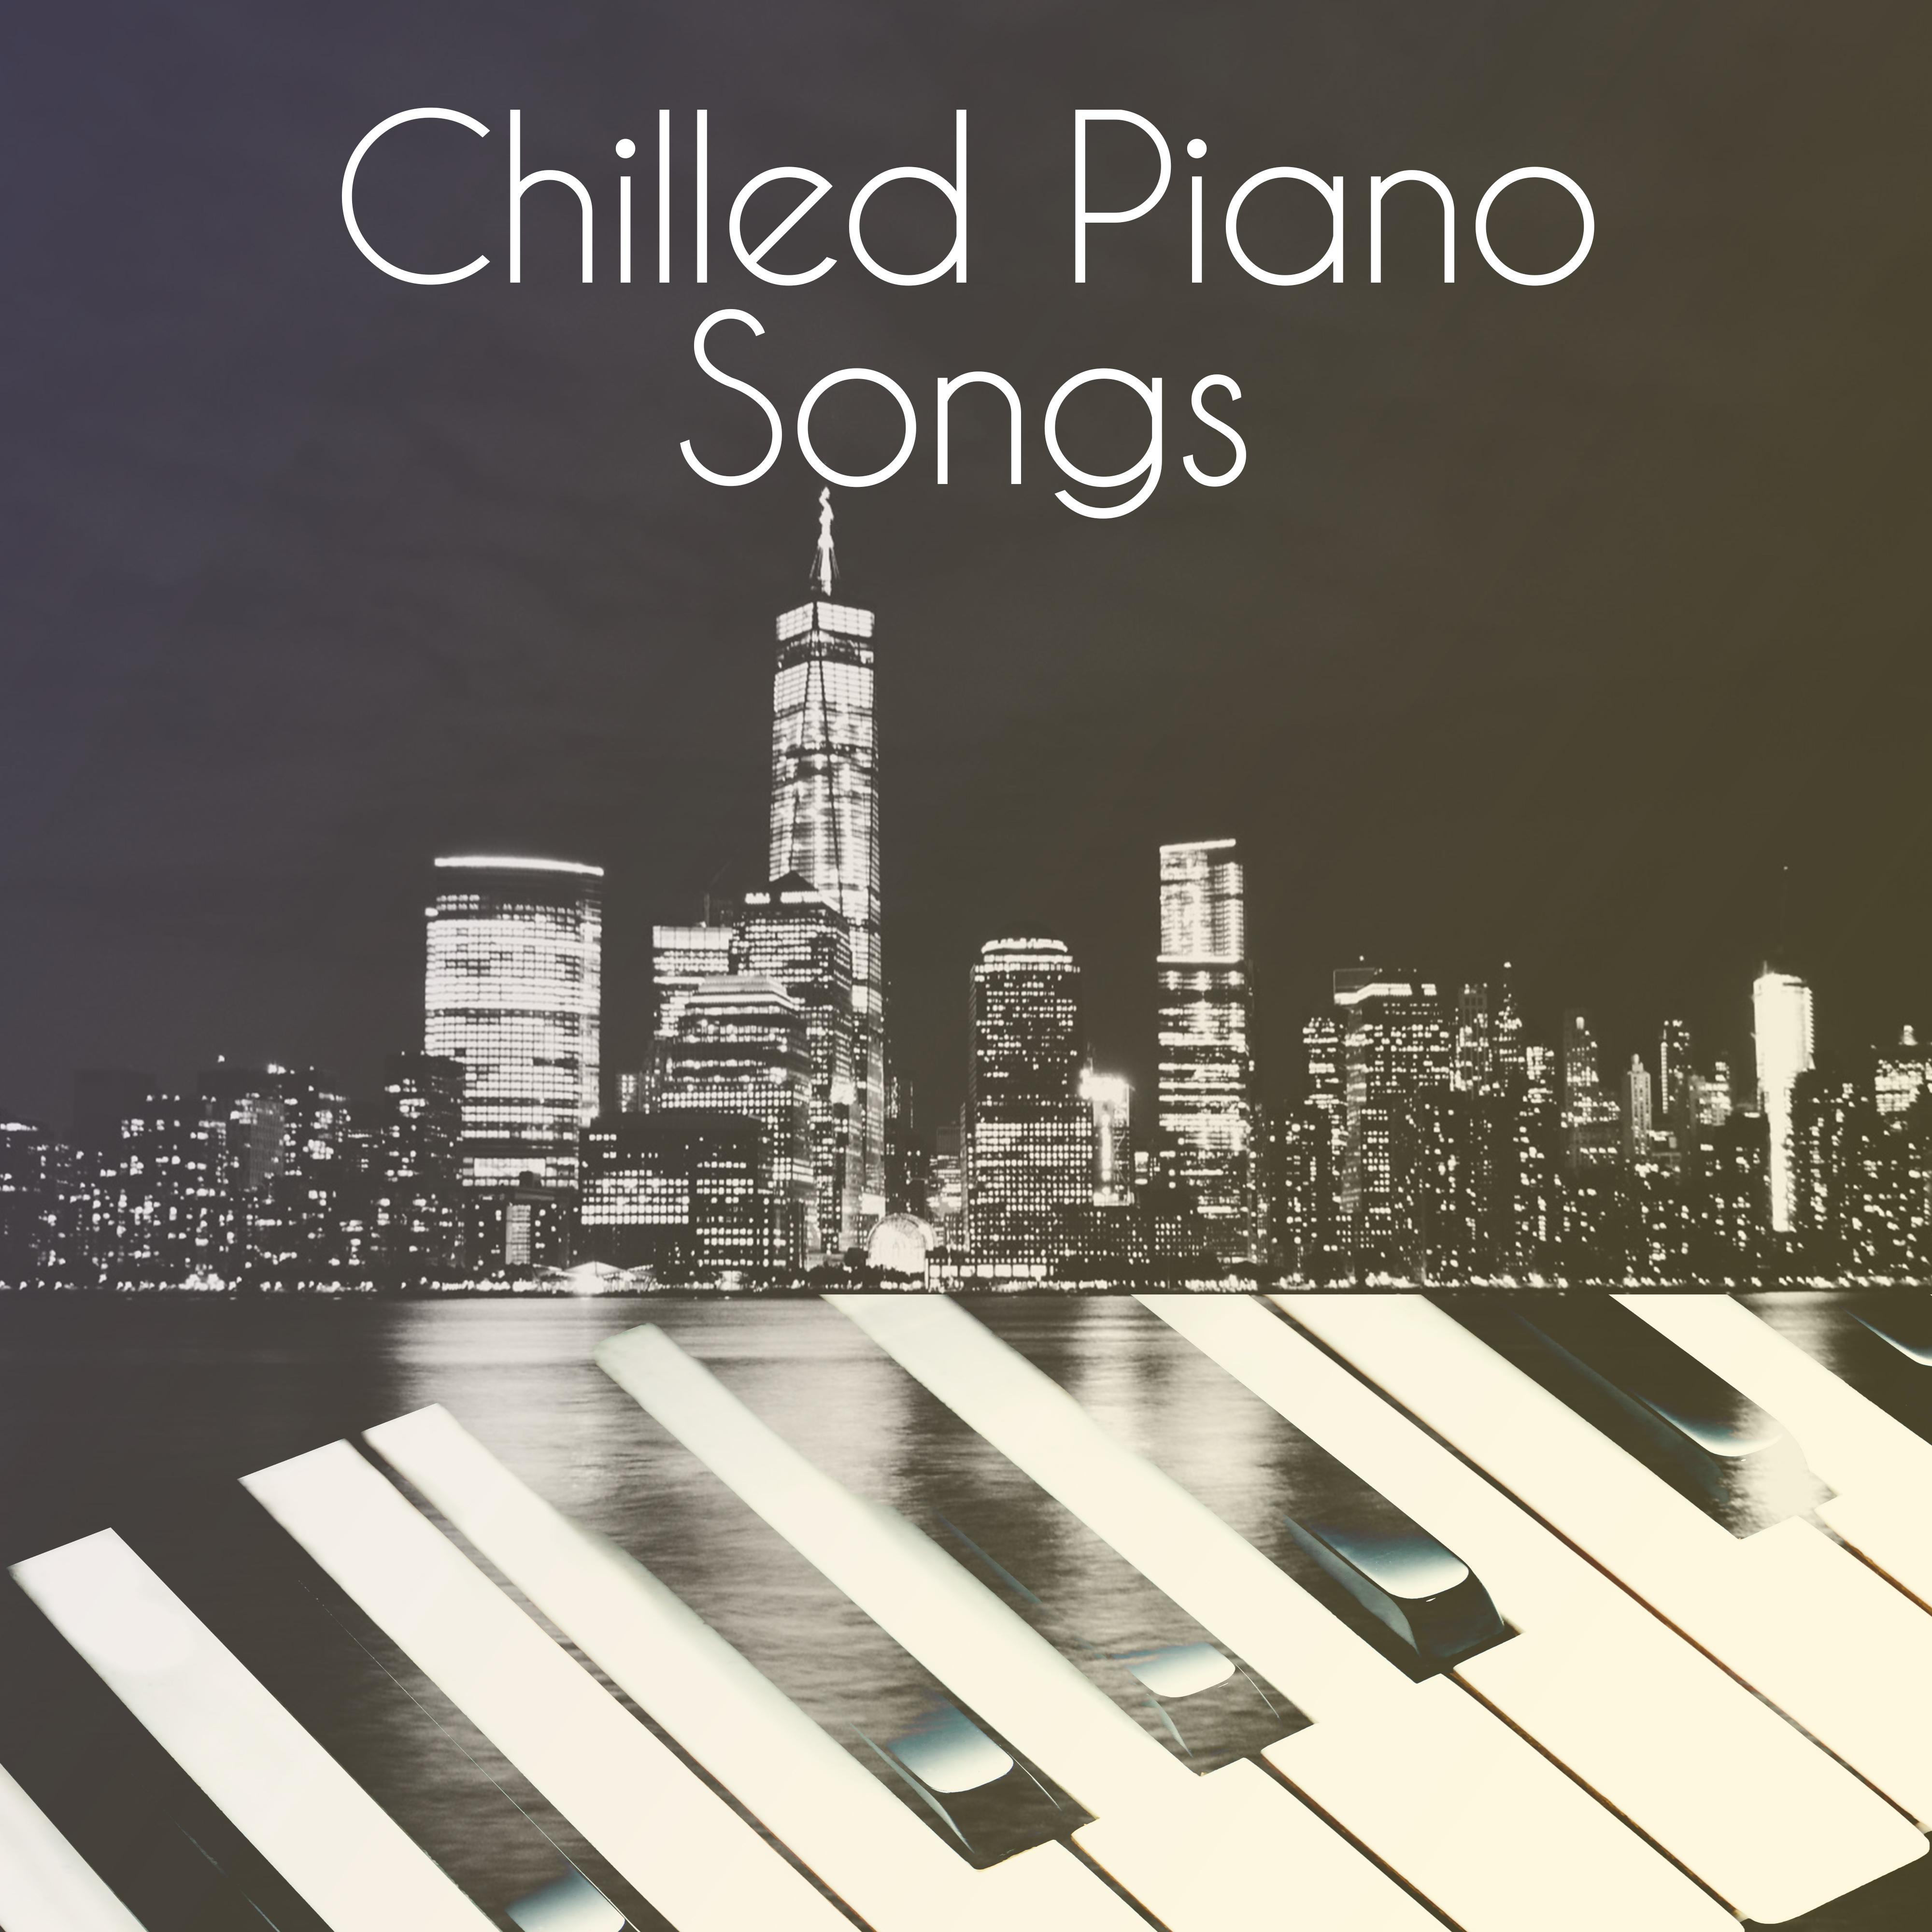 Chilled Piano Songs  Simple Instrumental Piano Music, Smooth Jazz, Relaxing Jazz Songs